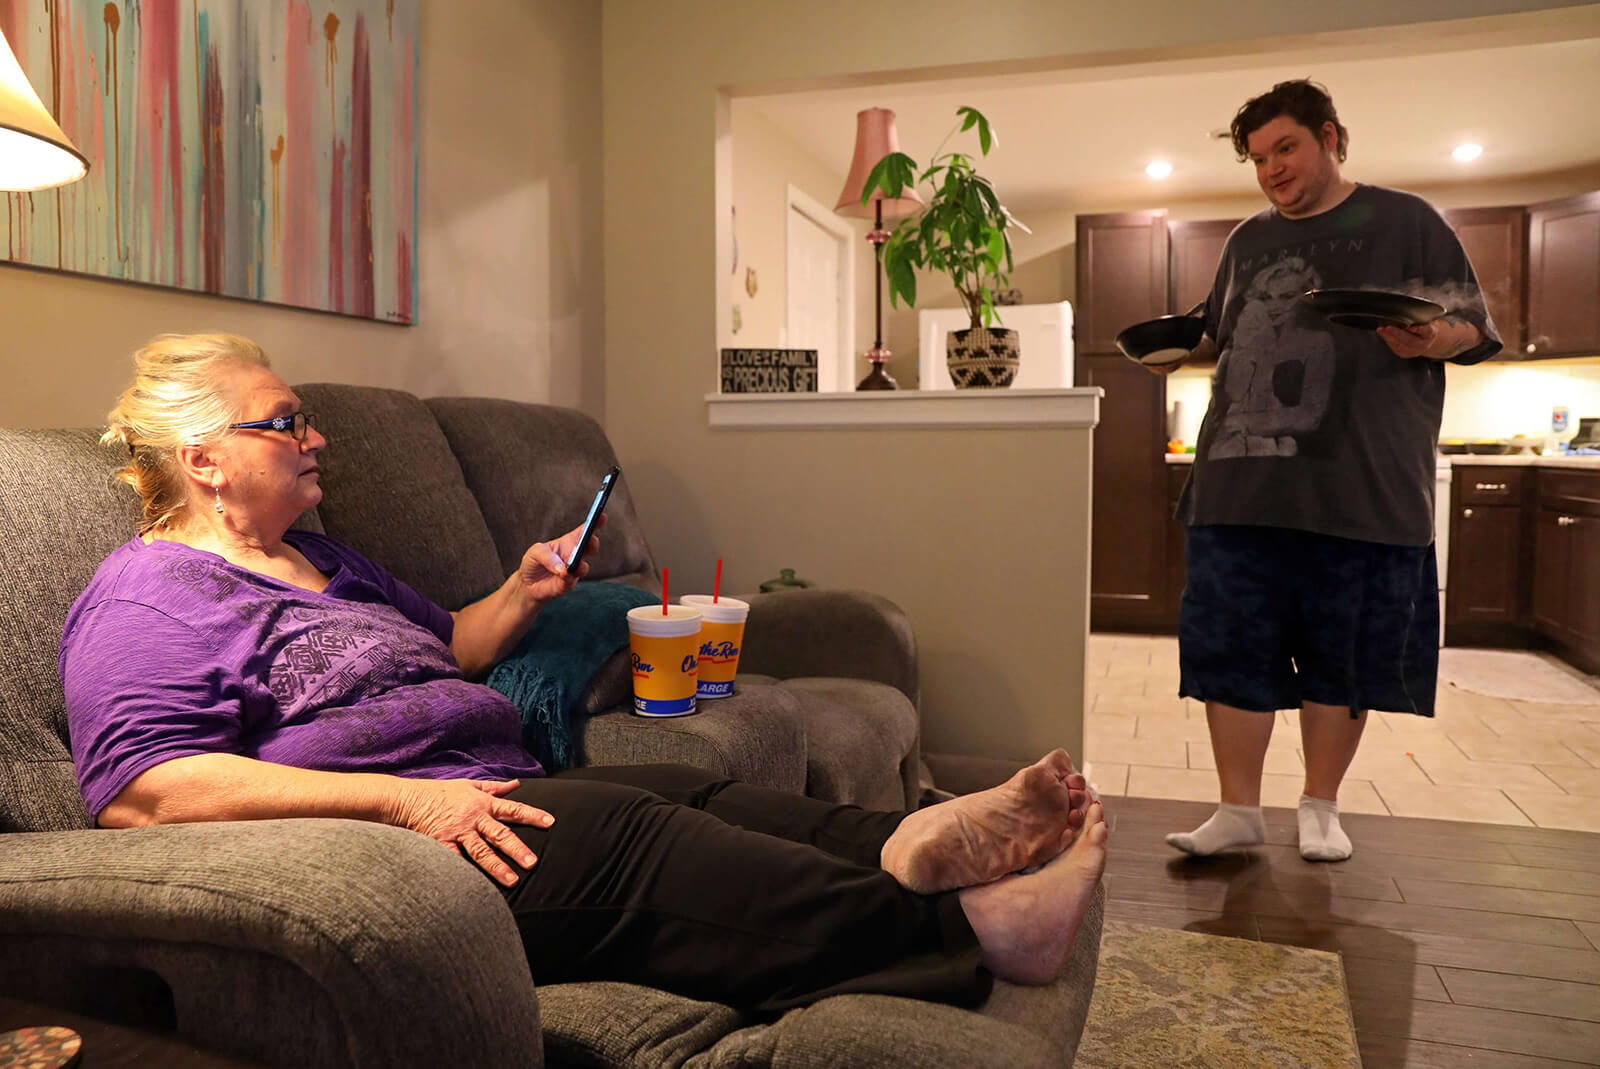 Dan Schicker brings a plate of food to his mother, Lonni Schicker, before they share a meal together on the couch in their Fenton apartment on Monday, July 30, 2018. The two, as roommates, spend a lot of their time at home watching television. Lonni, who was diagnosed with dementia in April, now is having problems operating the remote control and her phone.